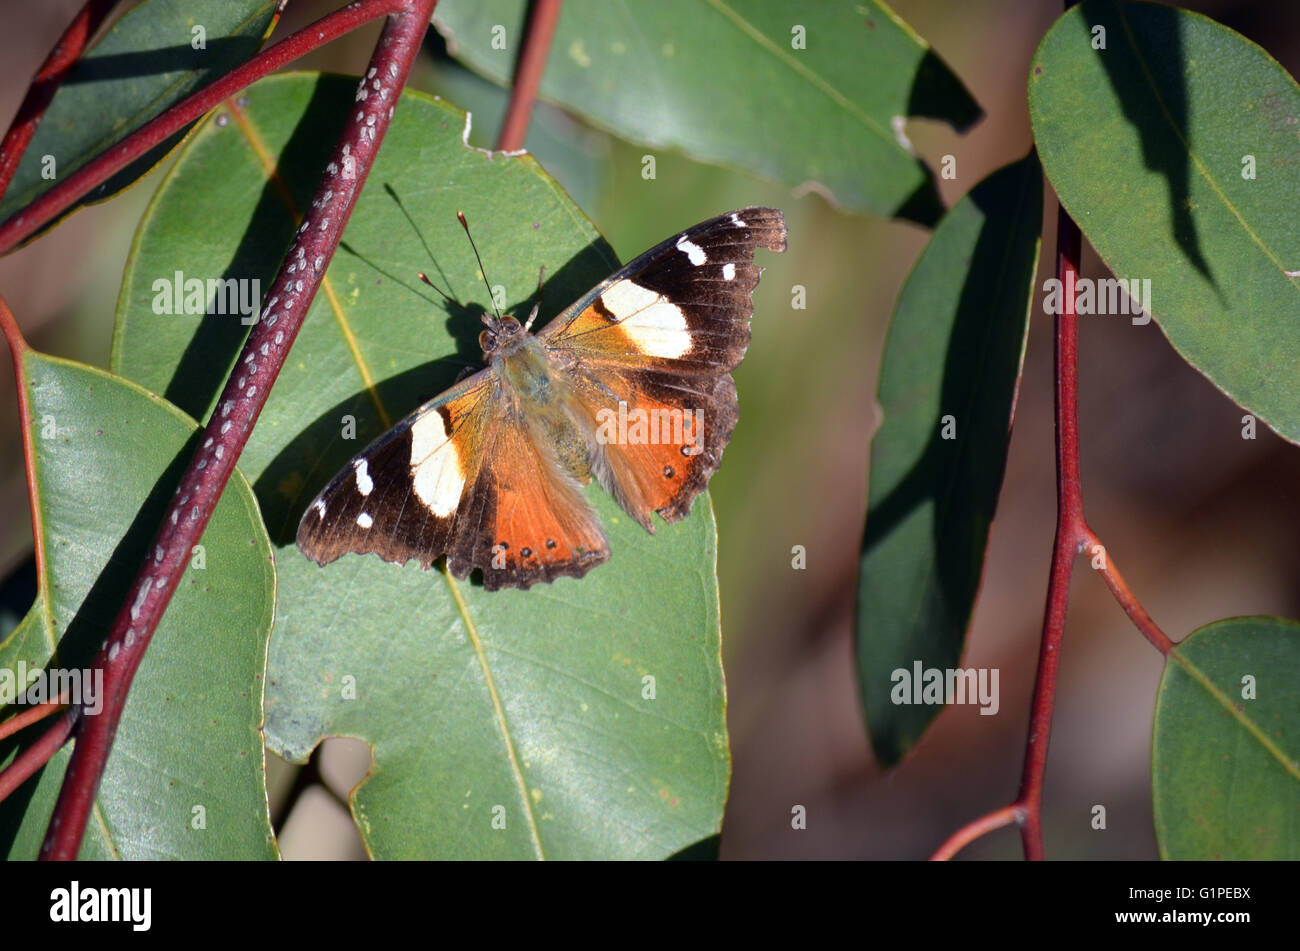 Australian Yellow Admiral  Butterfly, Vanessa itea, with wings spread on a Eucalyptus leaf Stock Photo